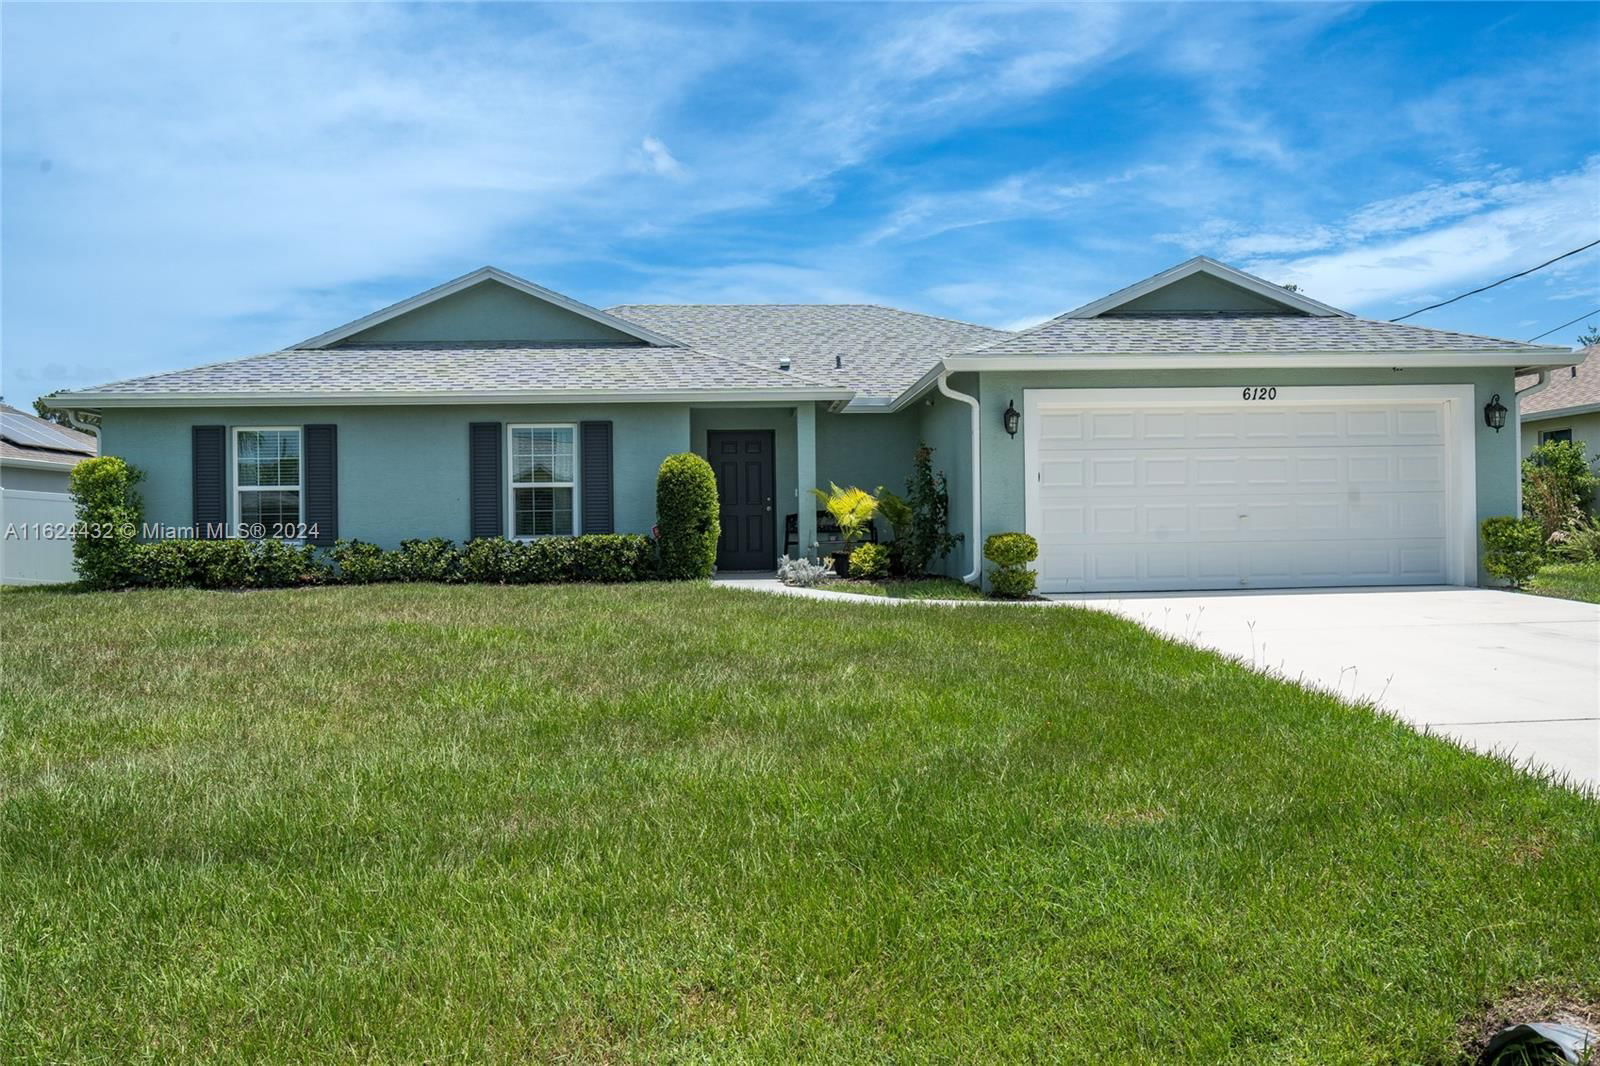 Real estate property located at 6120 Daroco Ter, St Lucie County, PORT ST LUCIE SECTION 44, Port St. Lucie, FL